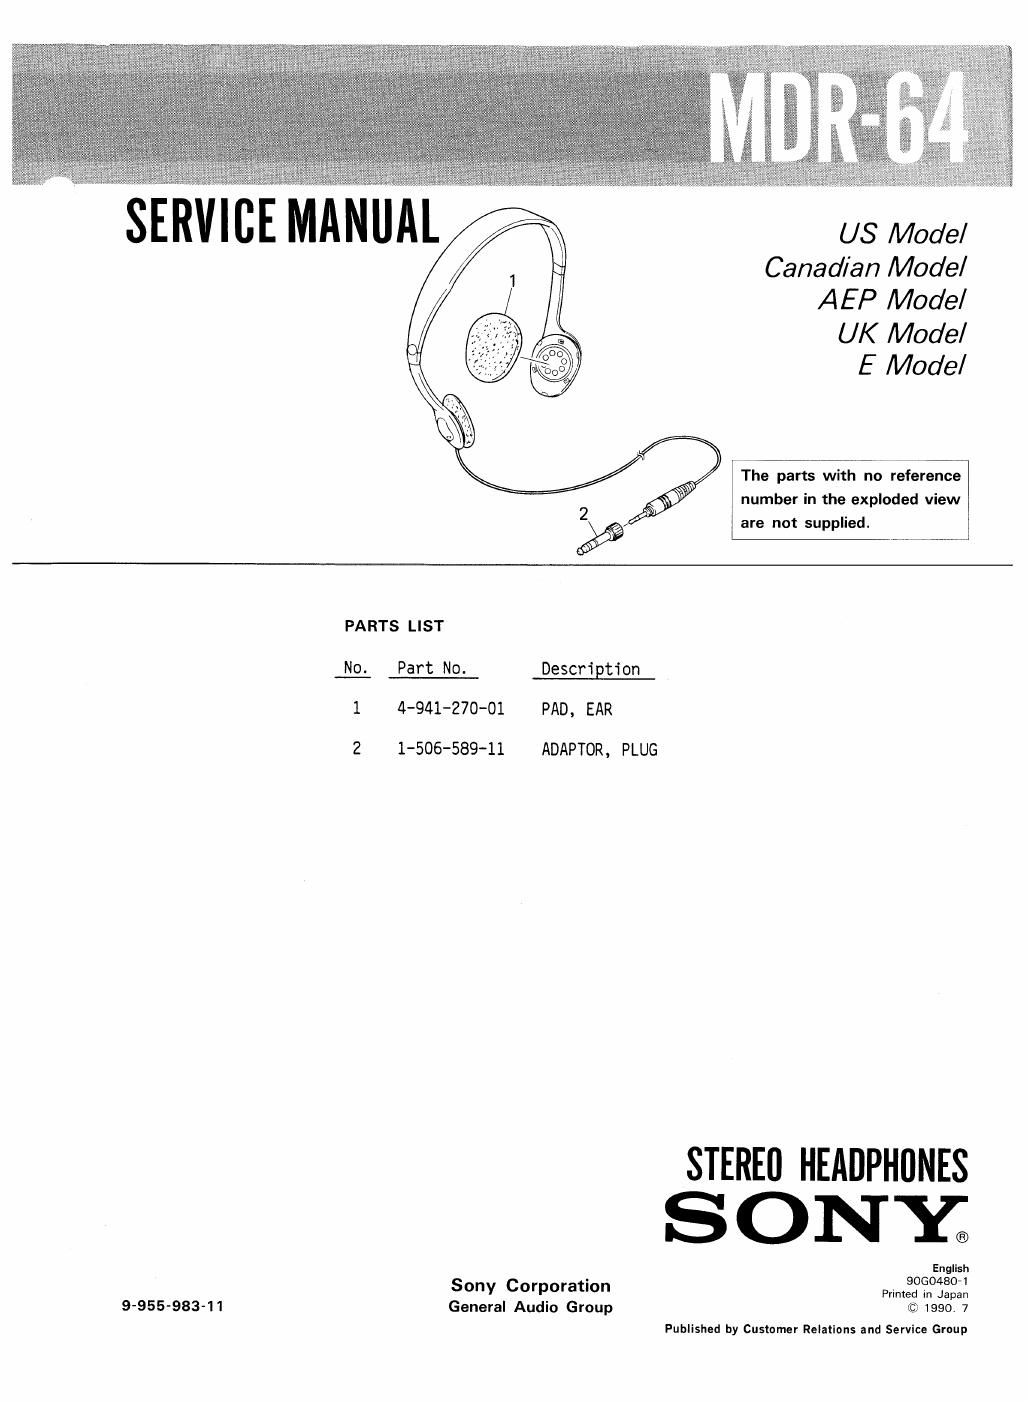 sony mdr 64 service manual